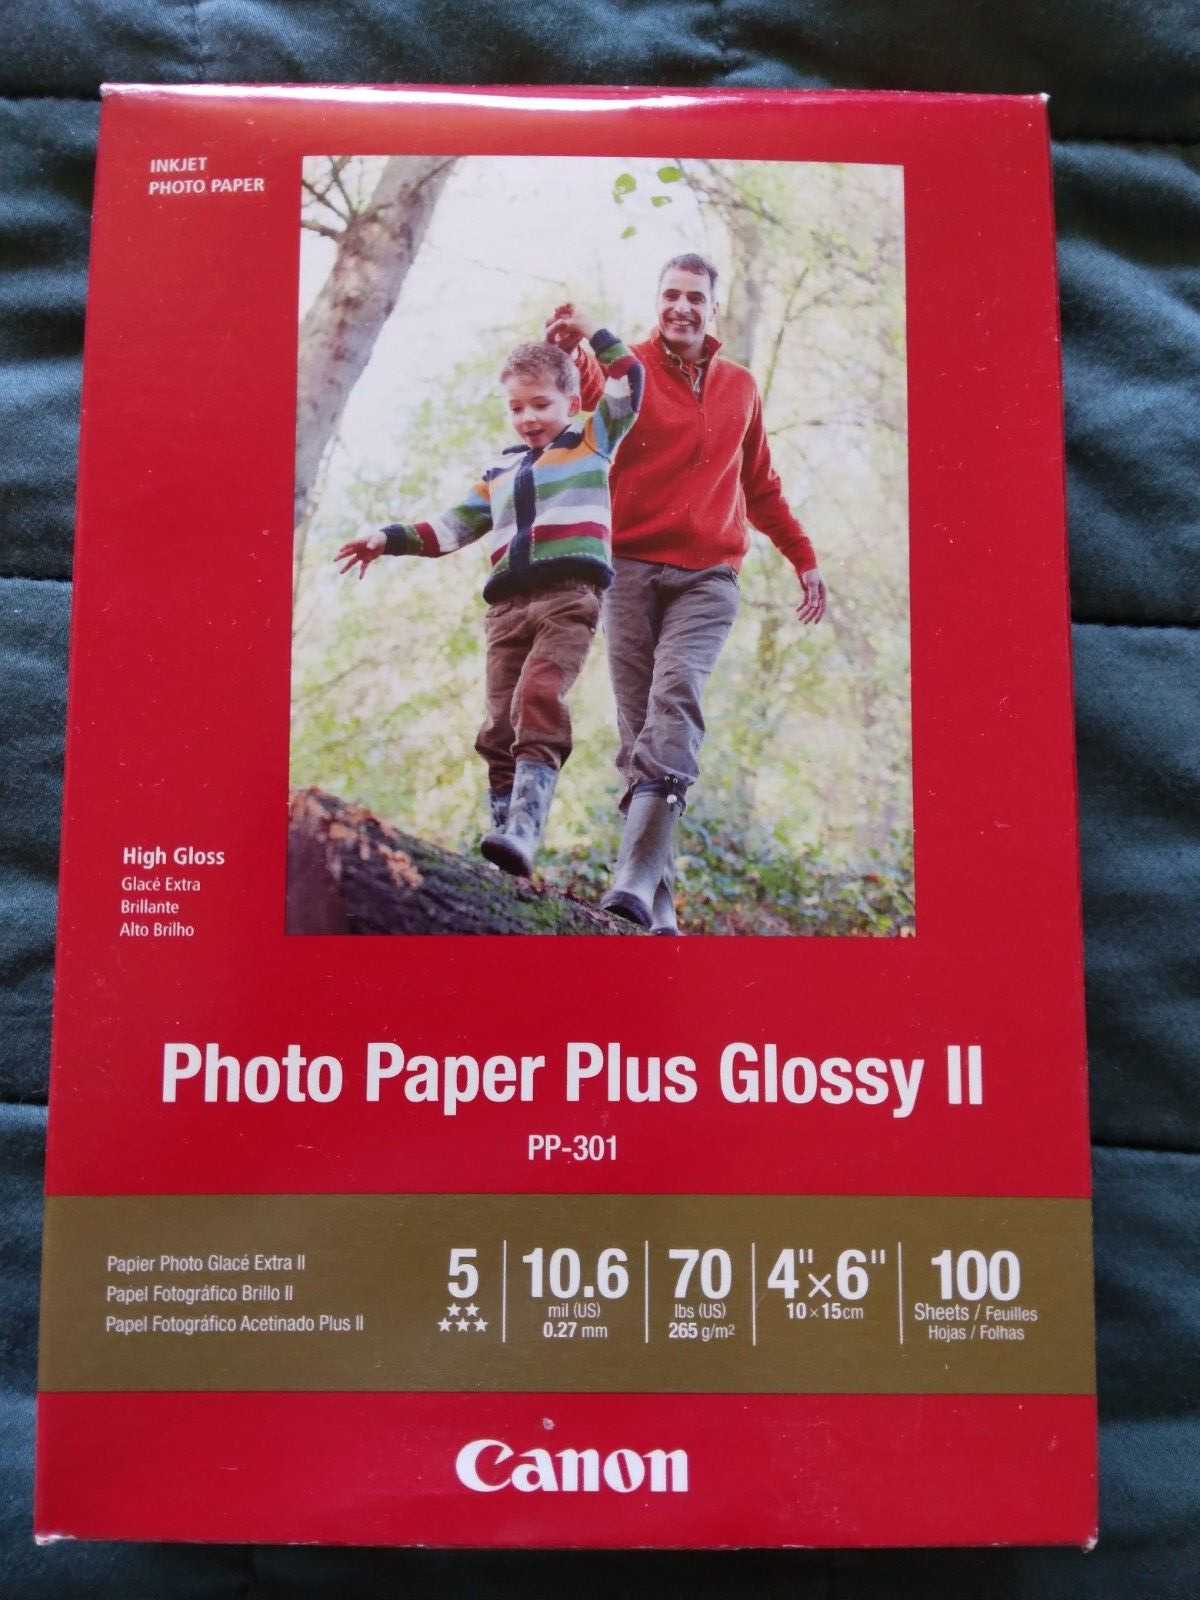 (100 Sheets) Canon Photo Paper Plus Glossy II PP-301